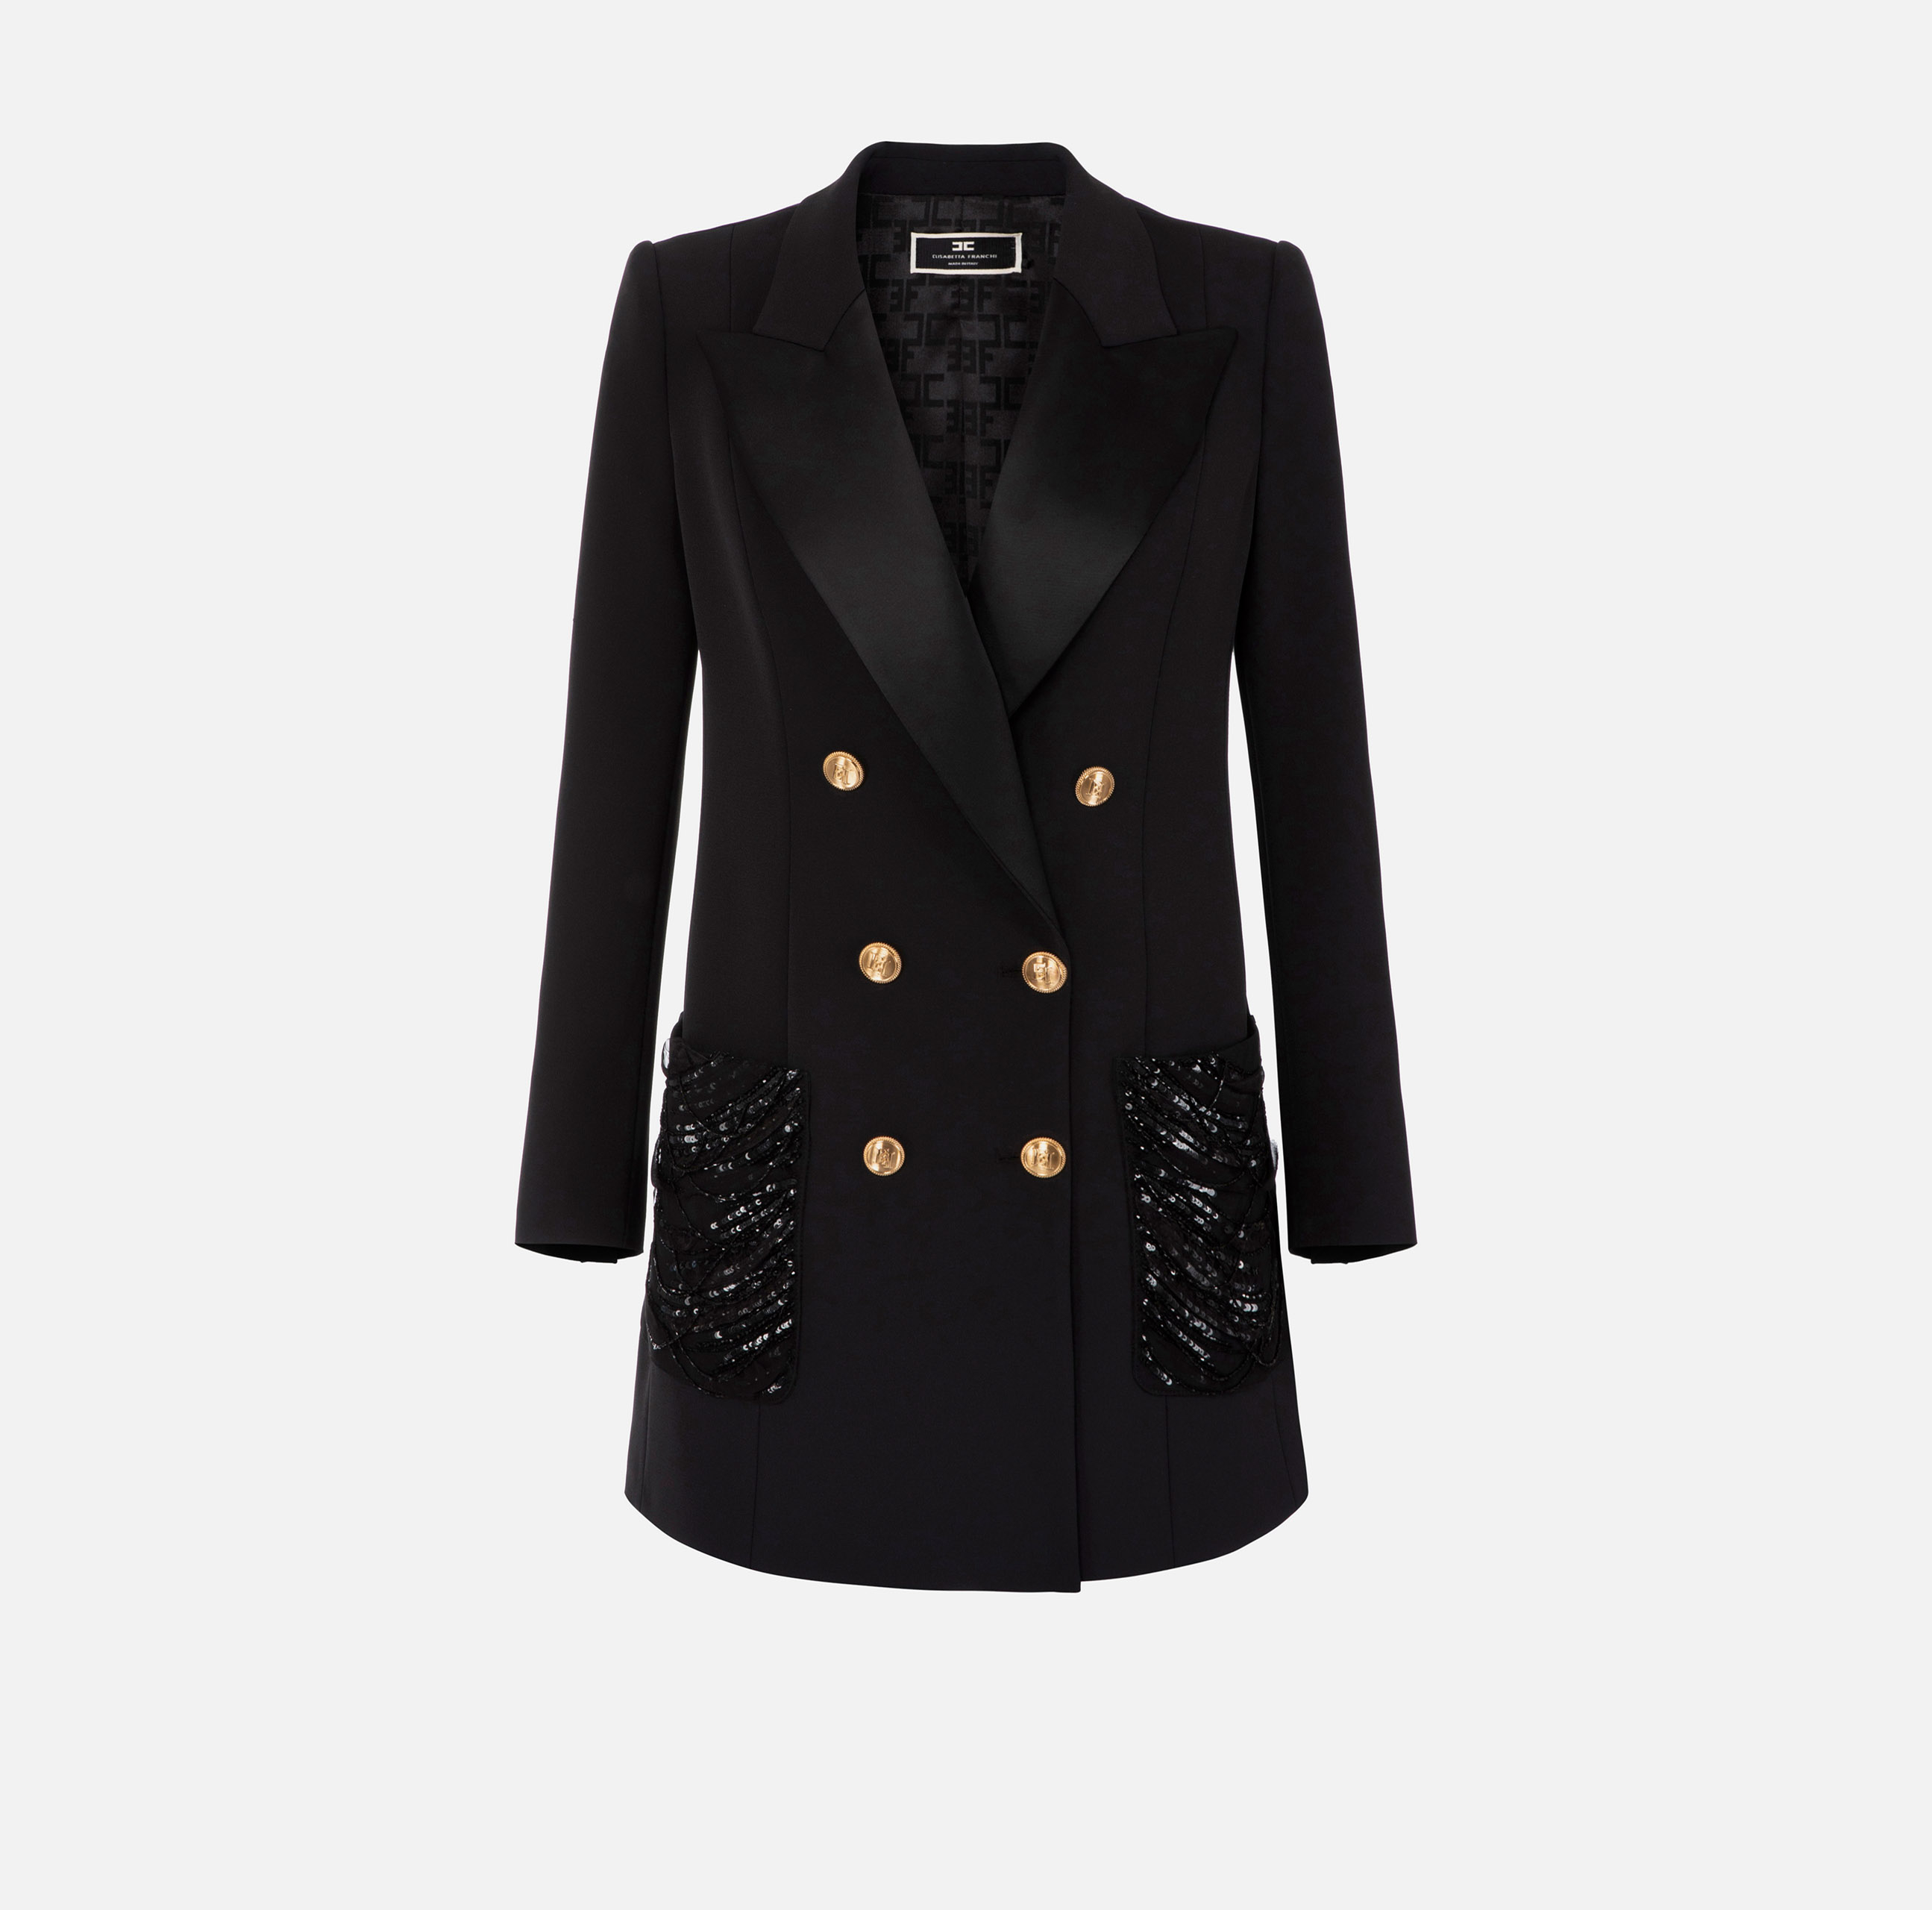 Coat dress in double layer crêpe fabric with embroidered pockets - ABBIGLIAMENTO - Elisabetta Franchi